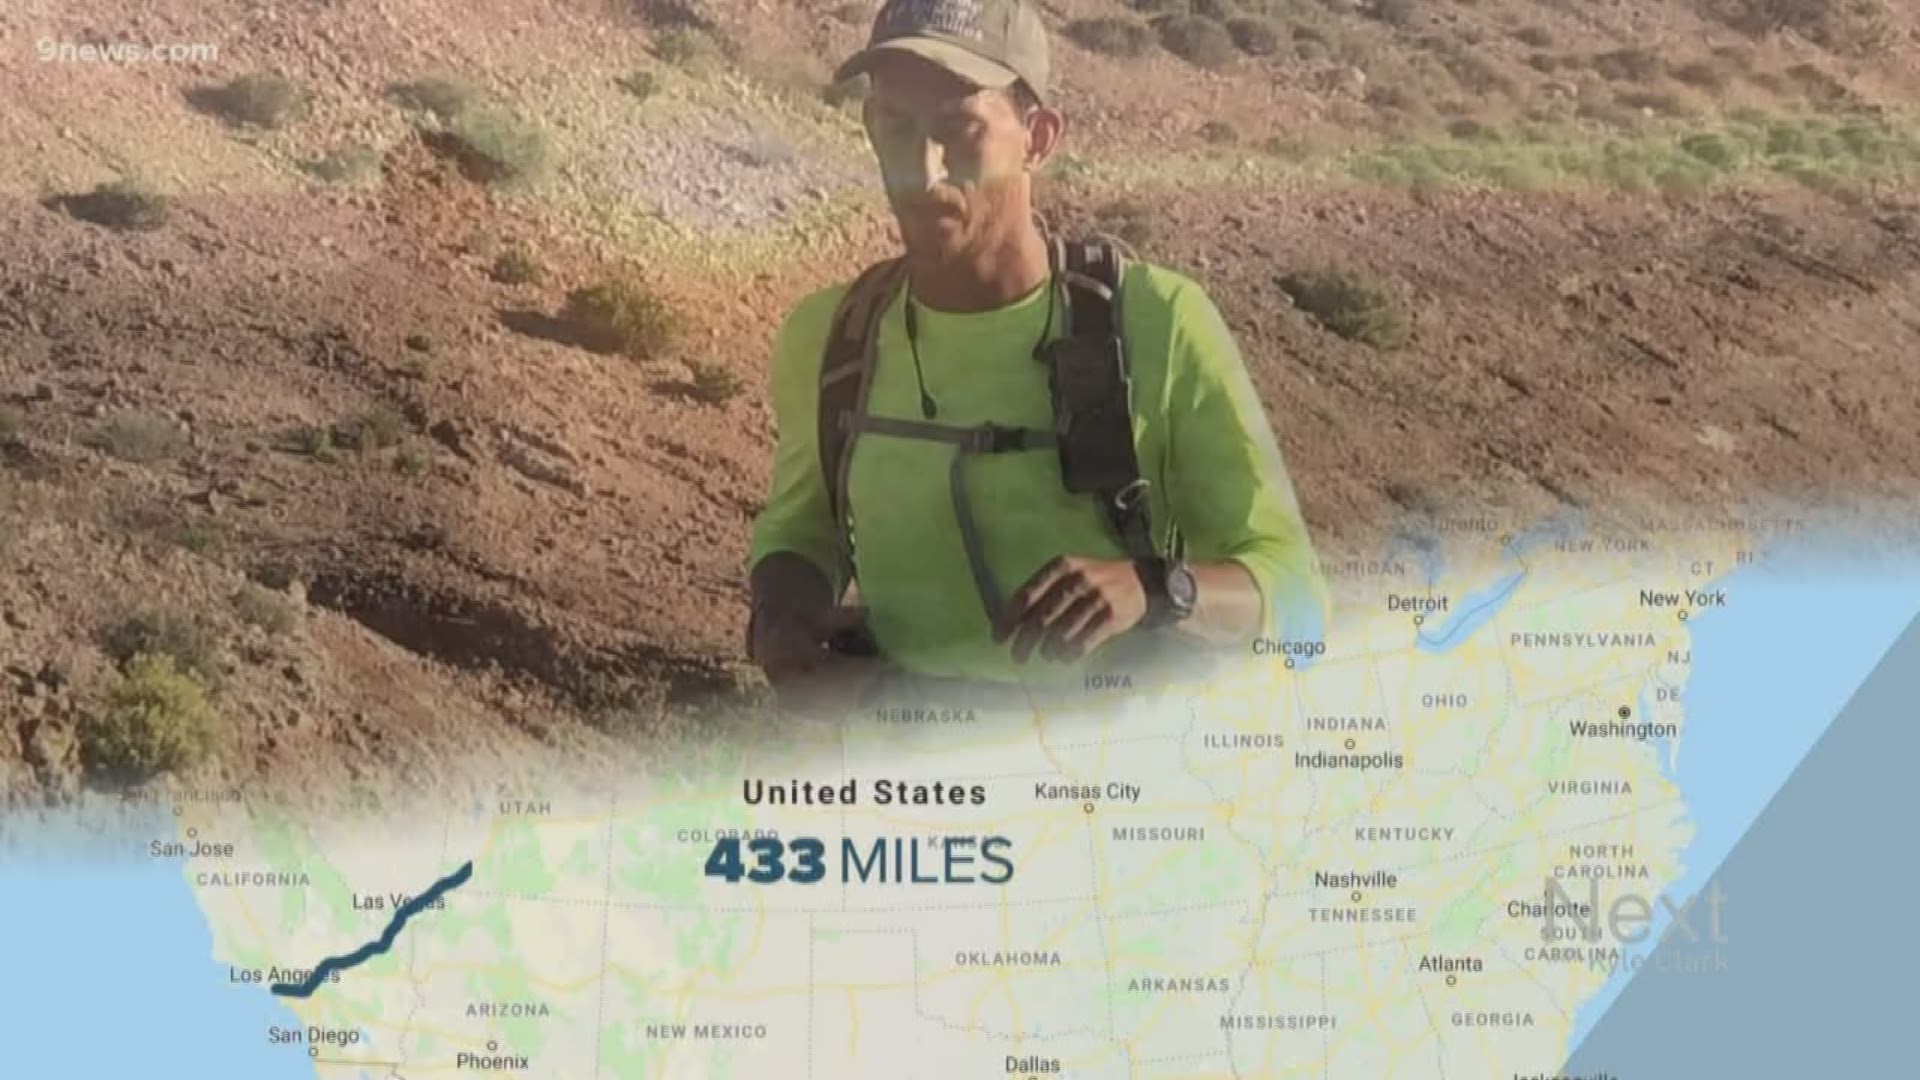 We last caught up with Noah Fredenberg back in June. He was in Colorado, running across the country to raise money for kids in foster care. He started at his home in Los Angeles, and just made it to New York.